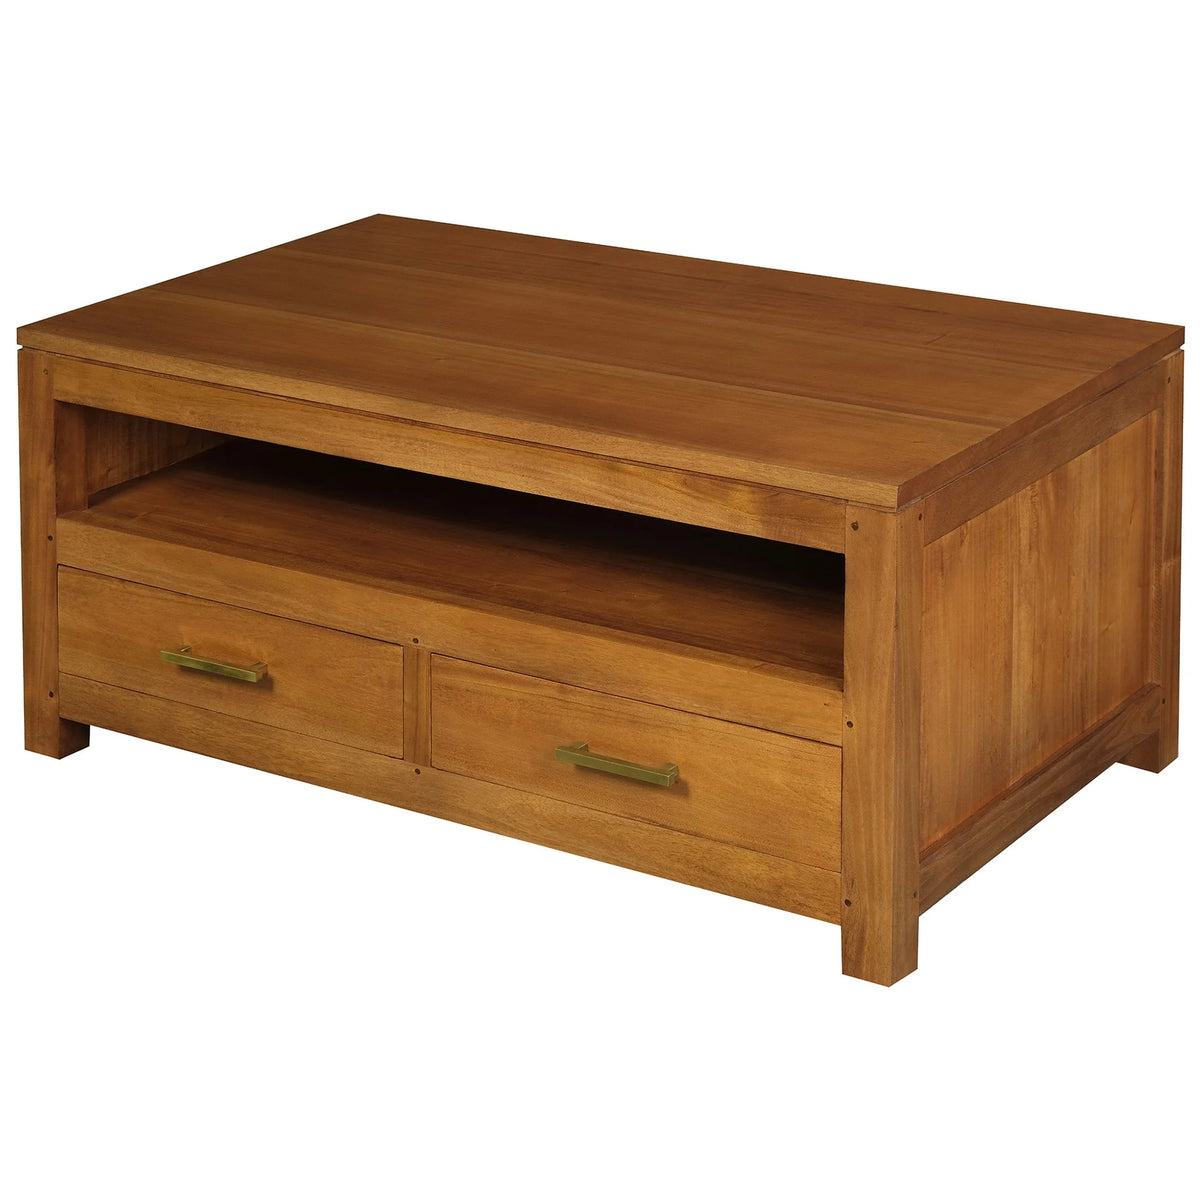 Paris Solid Timber 4 Drawer Coffee Table - Light Pecan